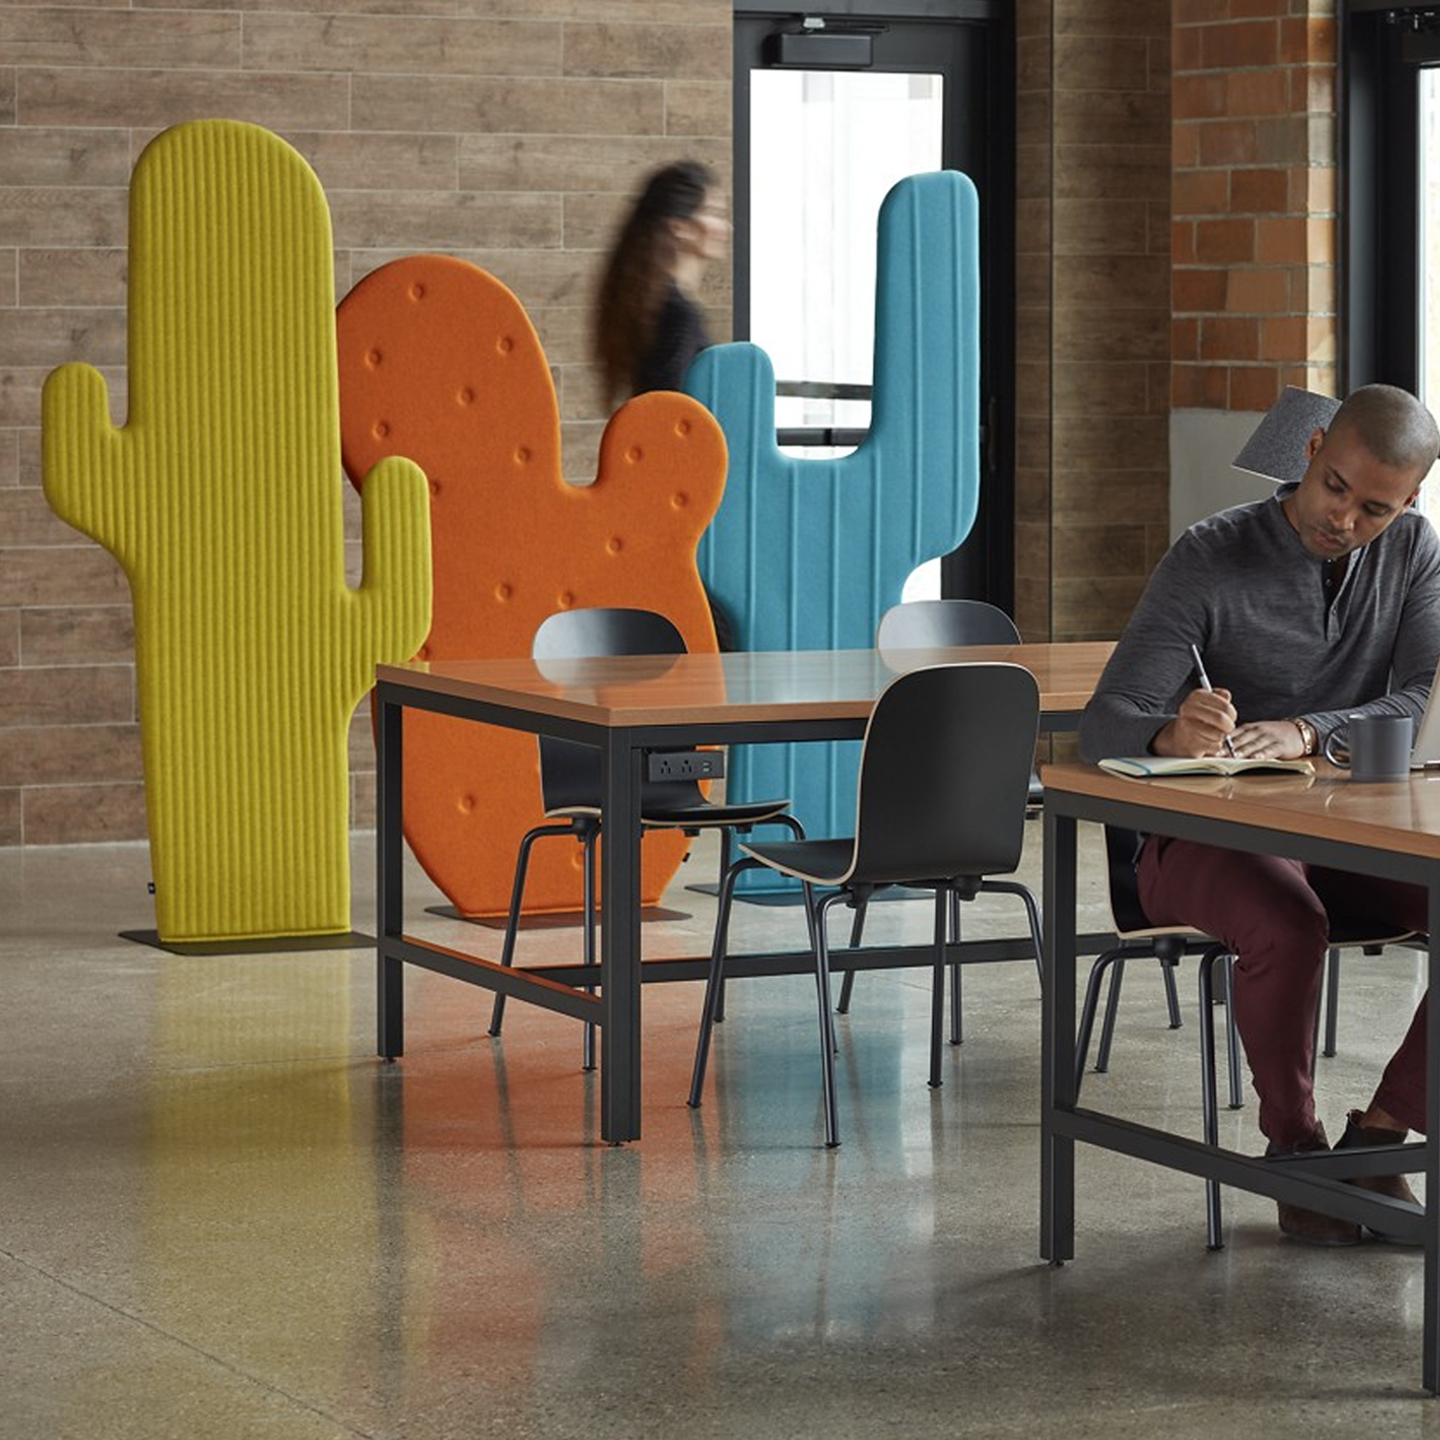 Haworth Buzzicactus screen in yellow, orange, and blue color in office space with employees working at collaboration table 